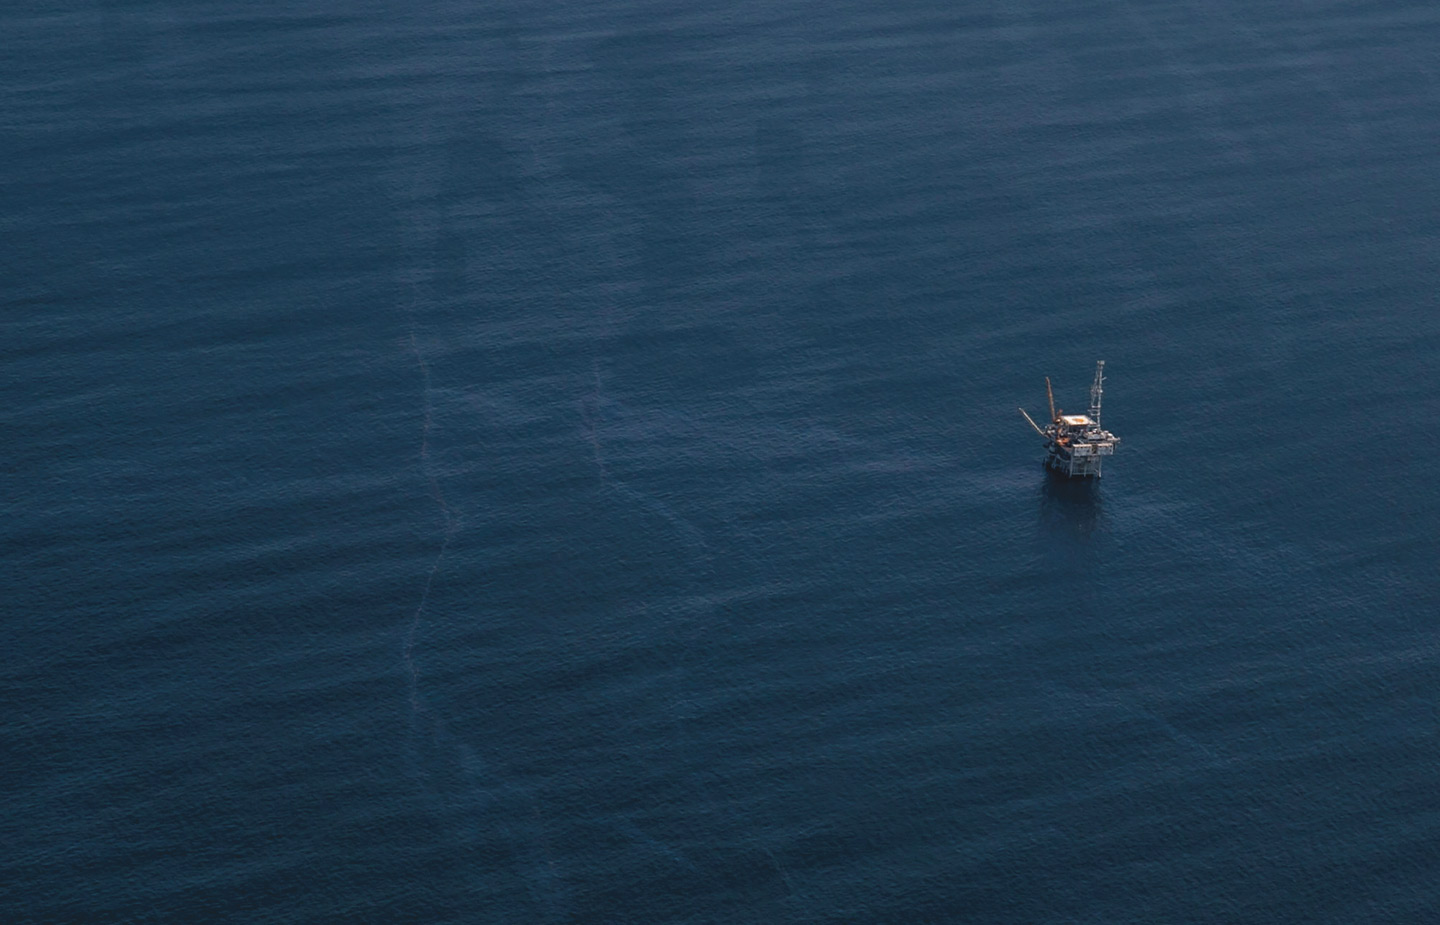 Image of oil rig in the middle of the ocean